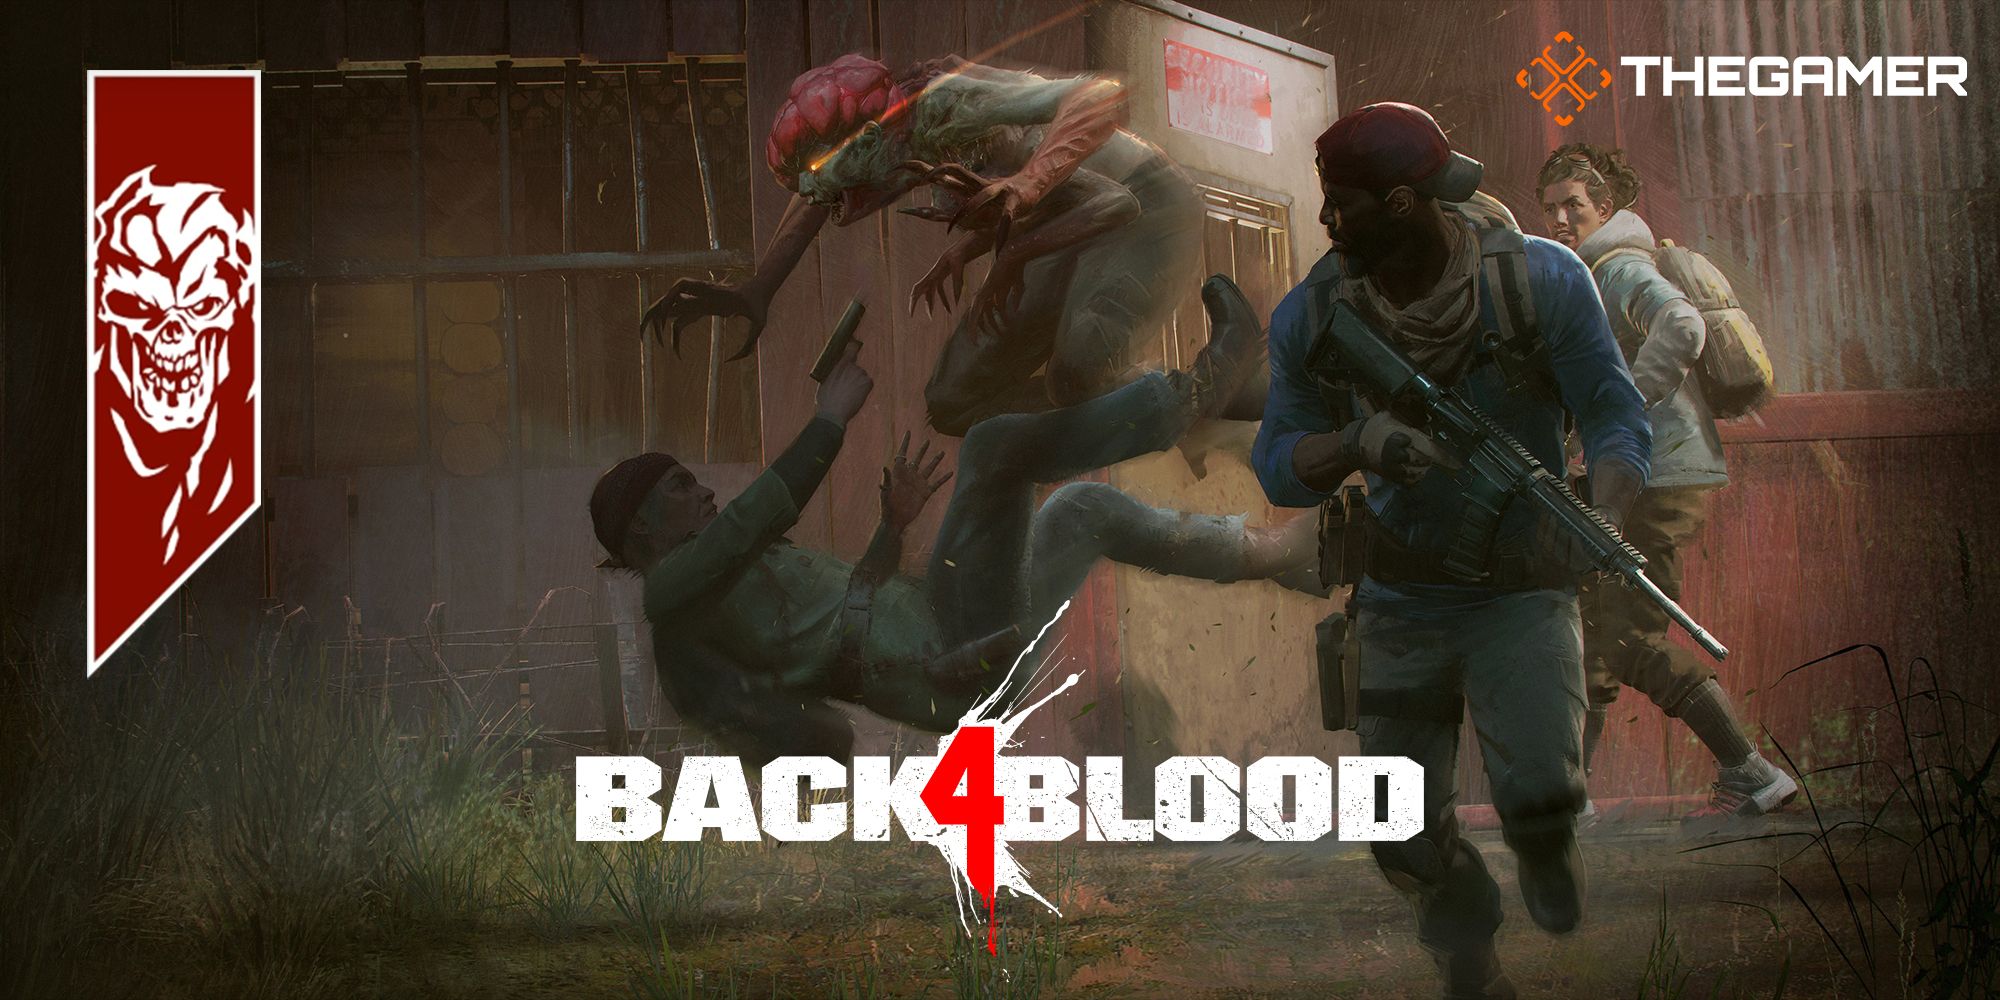 Mom being pounced by a Stalker in Back 4 Blood with the icon and banner for Nightmare difficulty on the left and Walker and Evangelo on the right